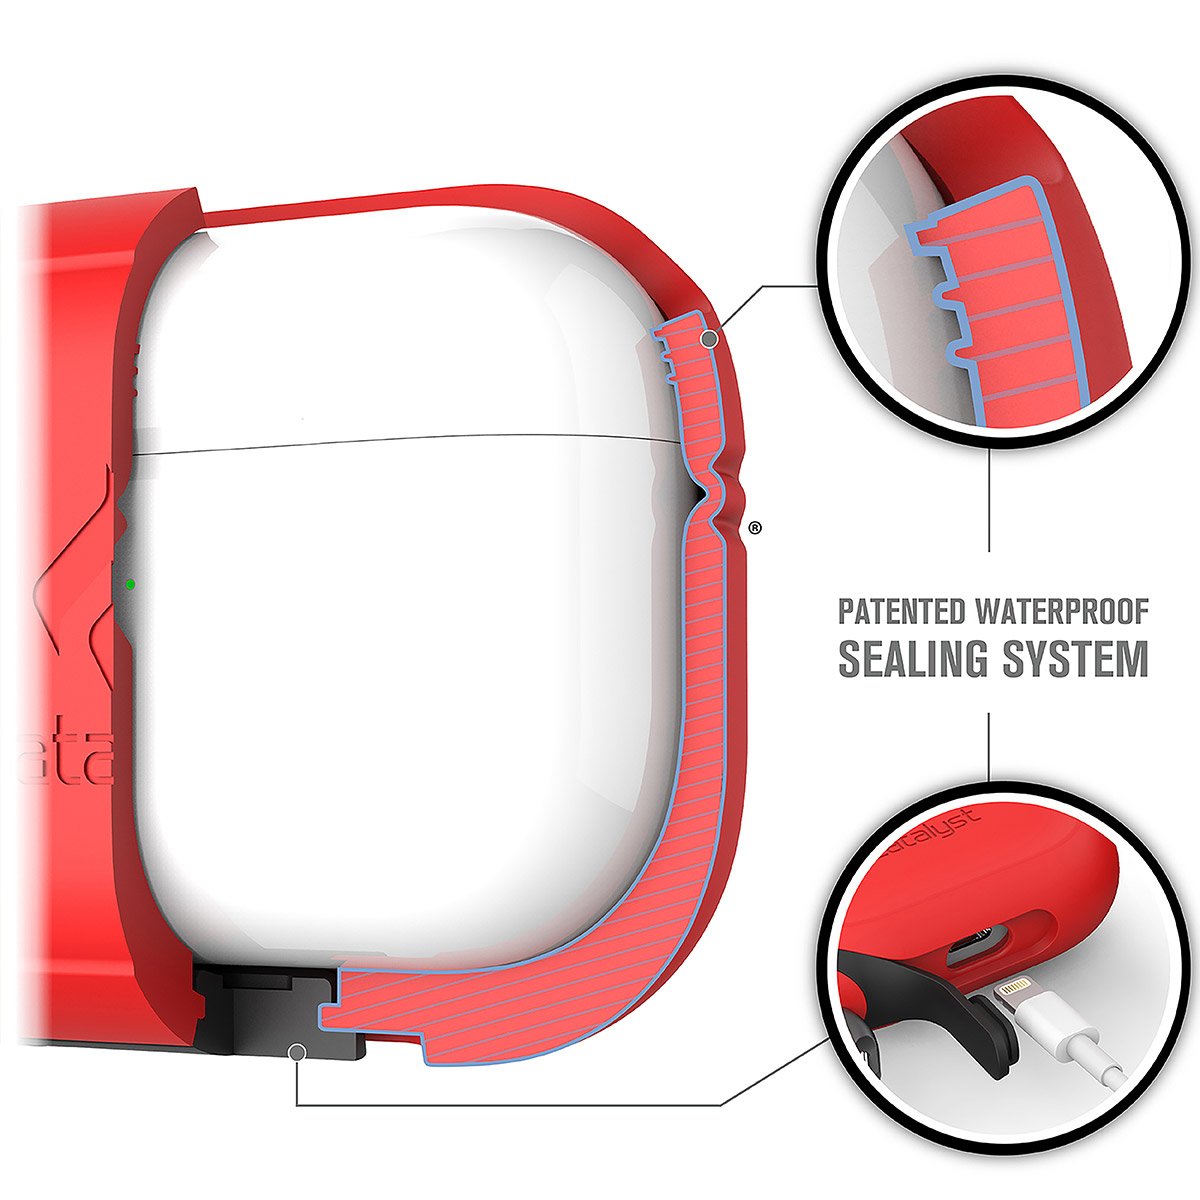 CATAPDPRORED | catalyst airpods pro gen 2 1 waterproof case carabiner flame red showing the patented waterproof sealing system texts reads patented waterproof sealing system